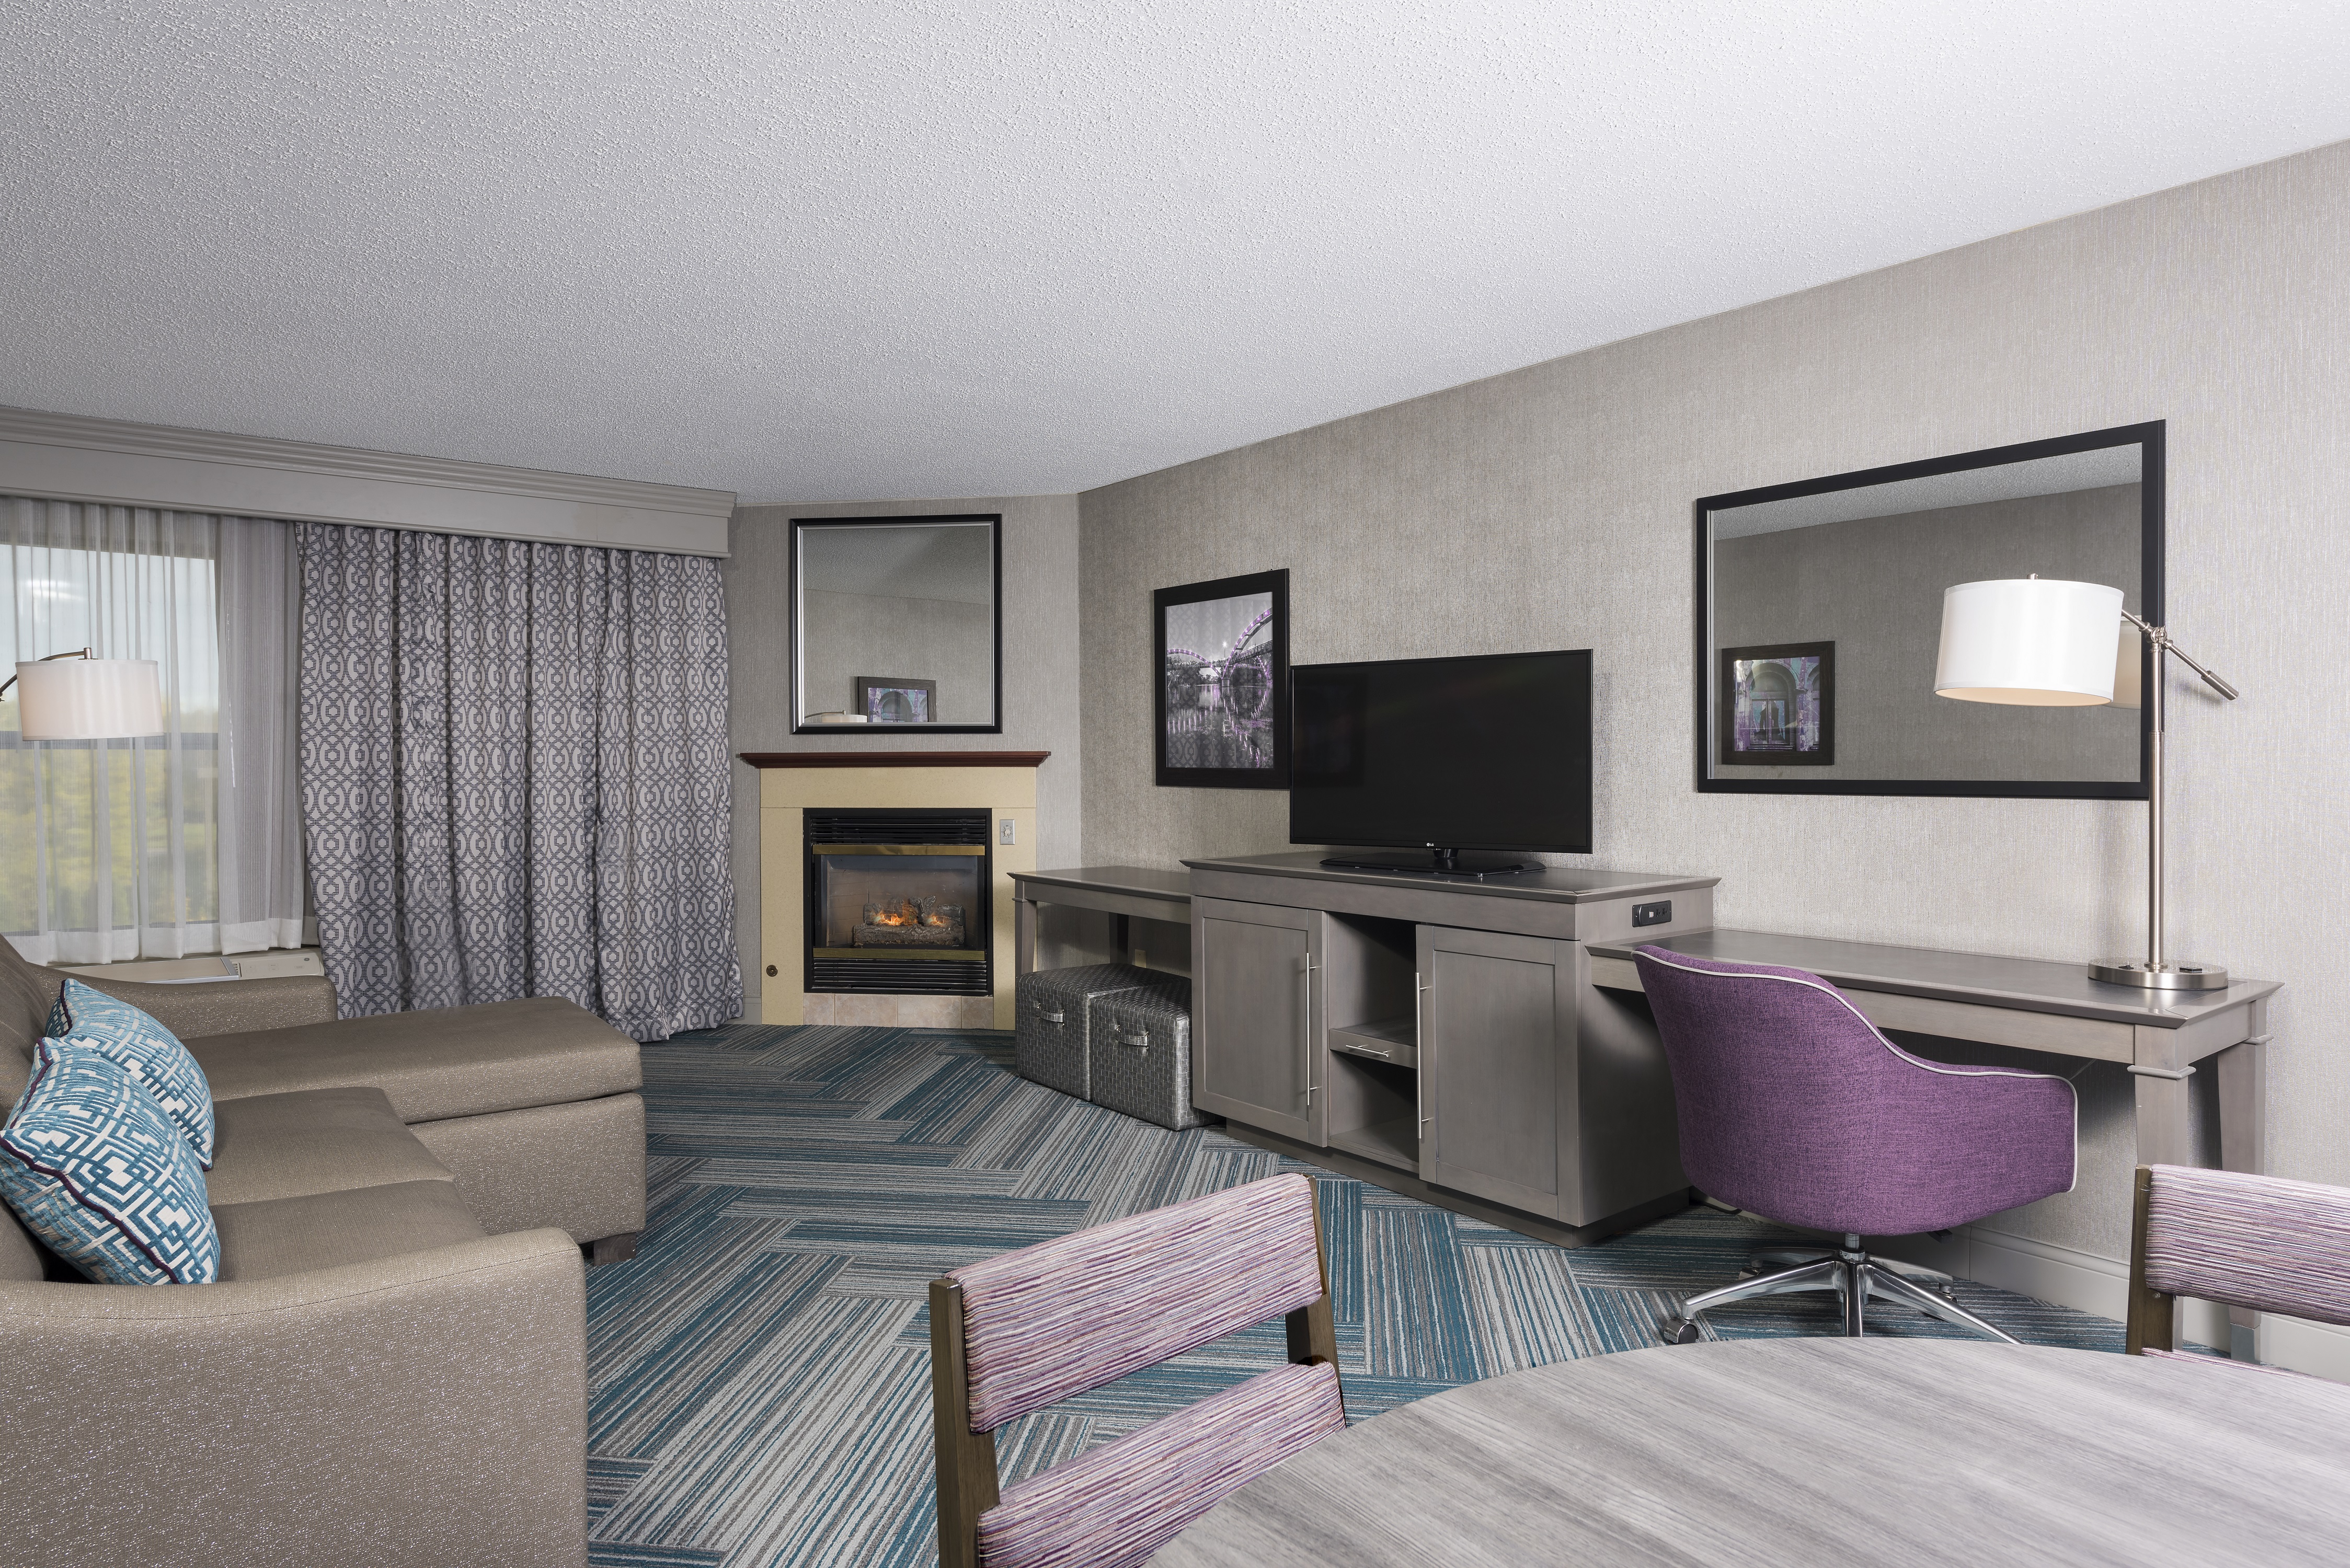 Guest Suite Lounge Area with HDTV, Work Desk, Fireplace and Sofa